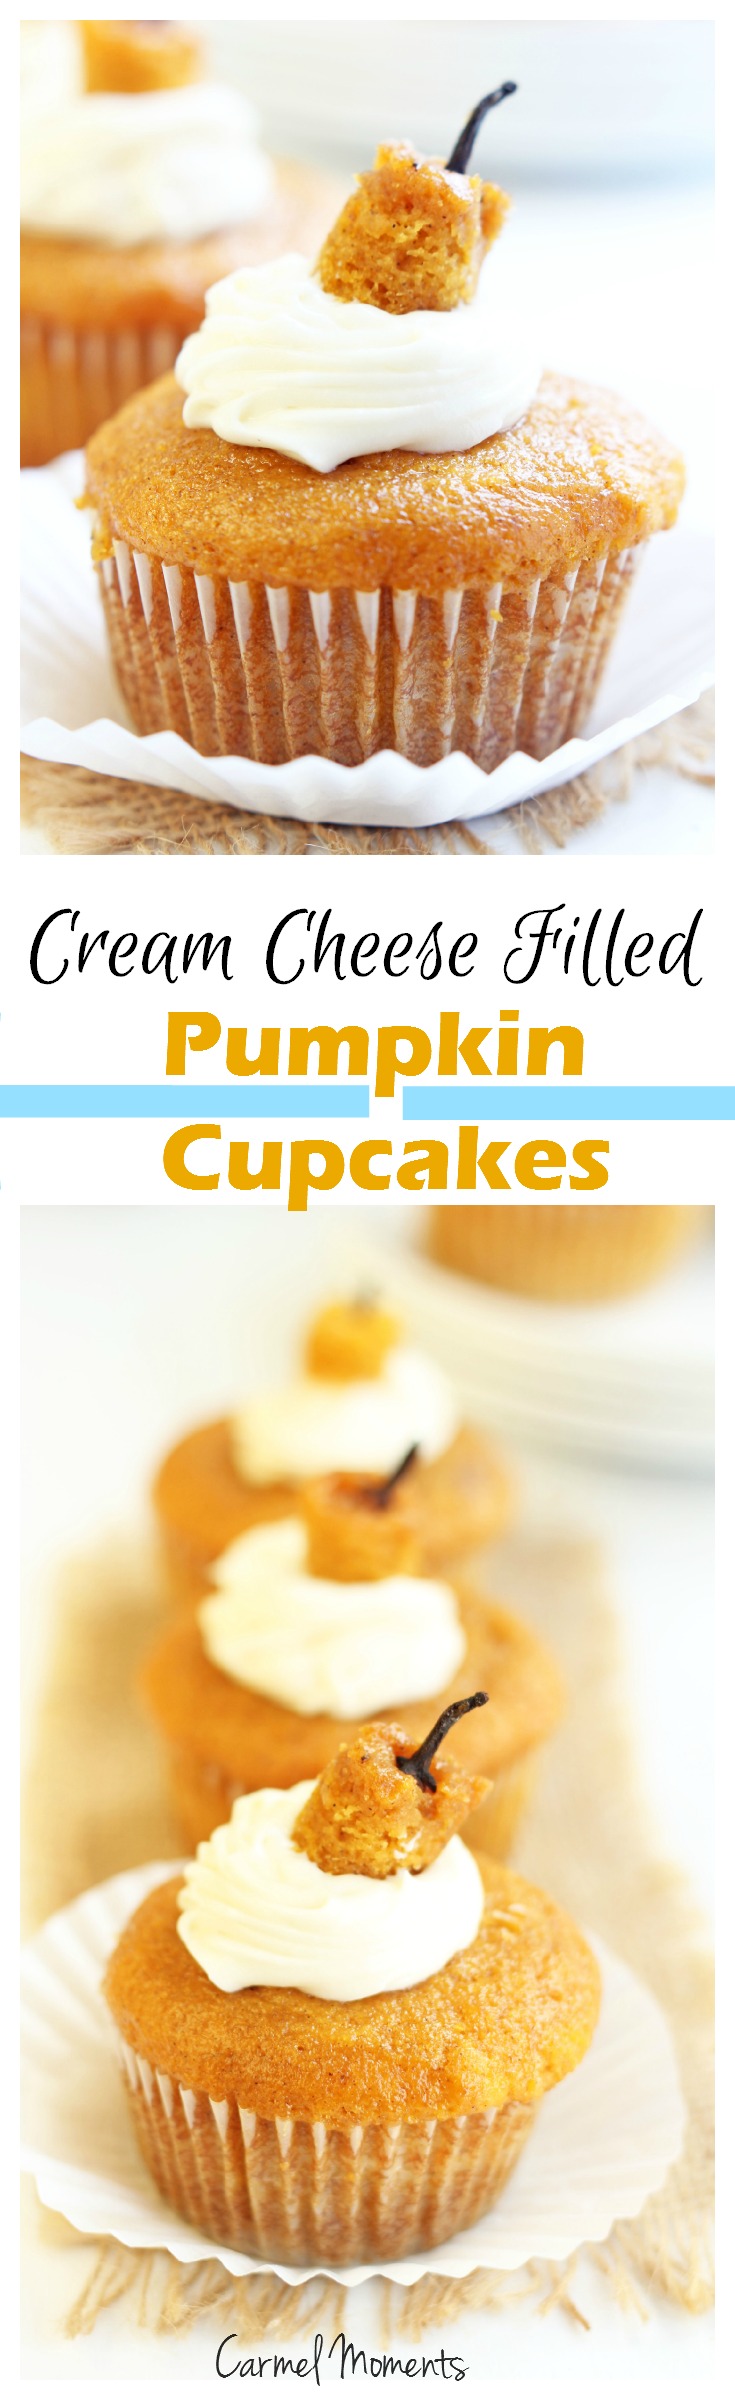 Cream Cheese Filled Cupcakes